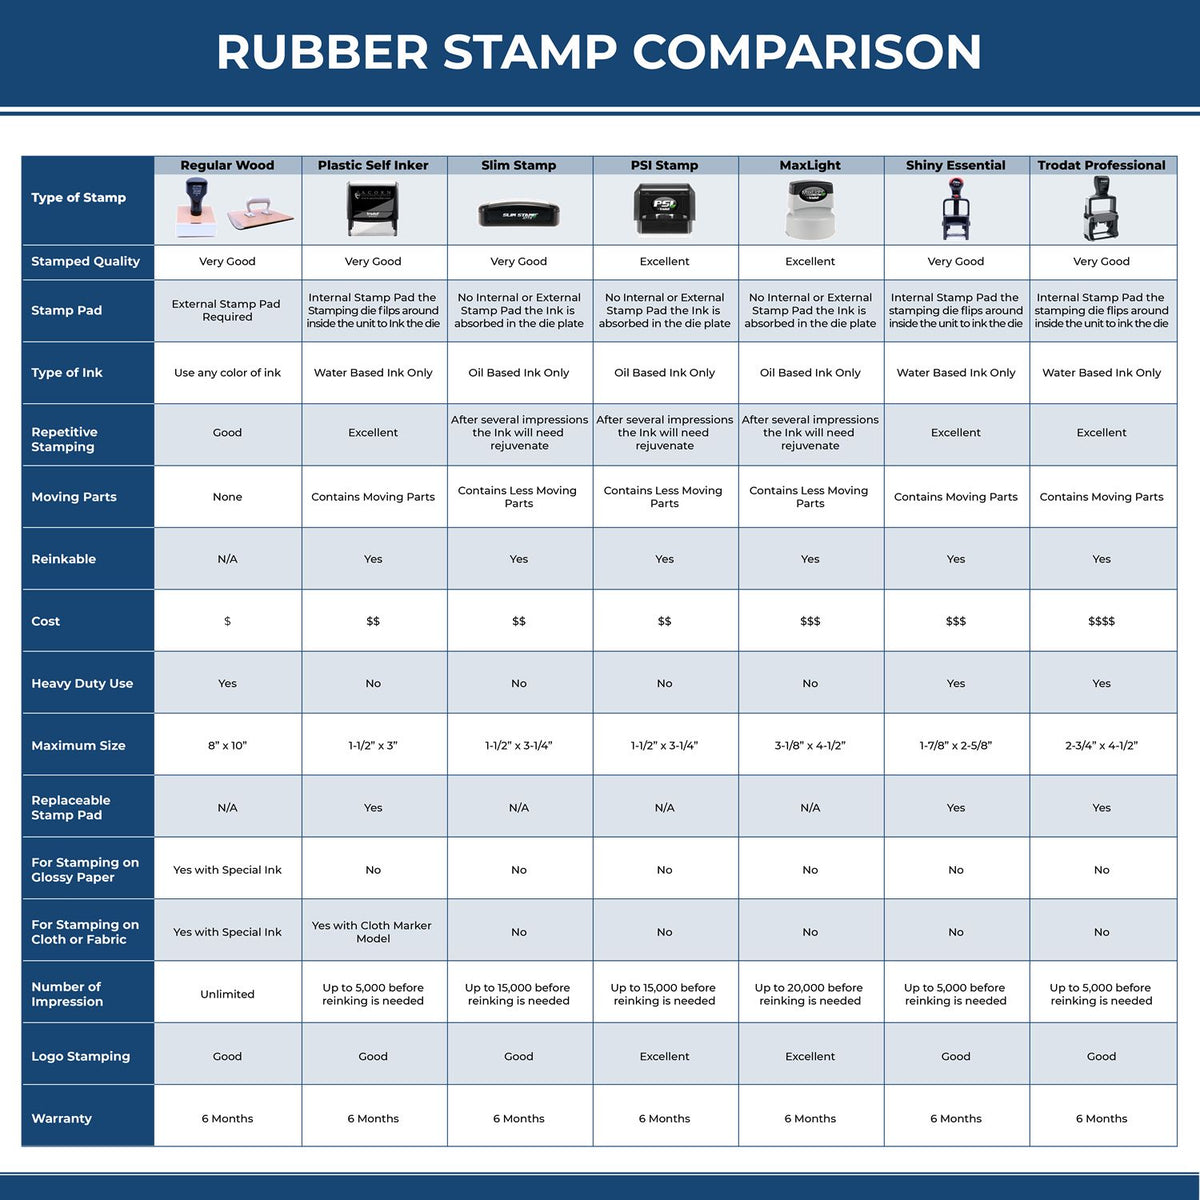 No Referral Needed Medical Rubber Stamp 4218R Rubber Stamp Comparison